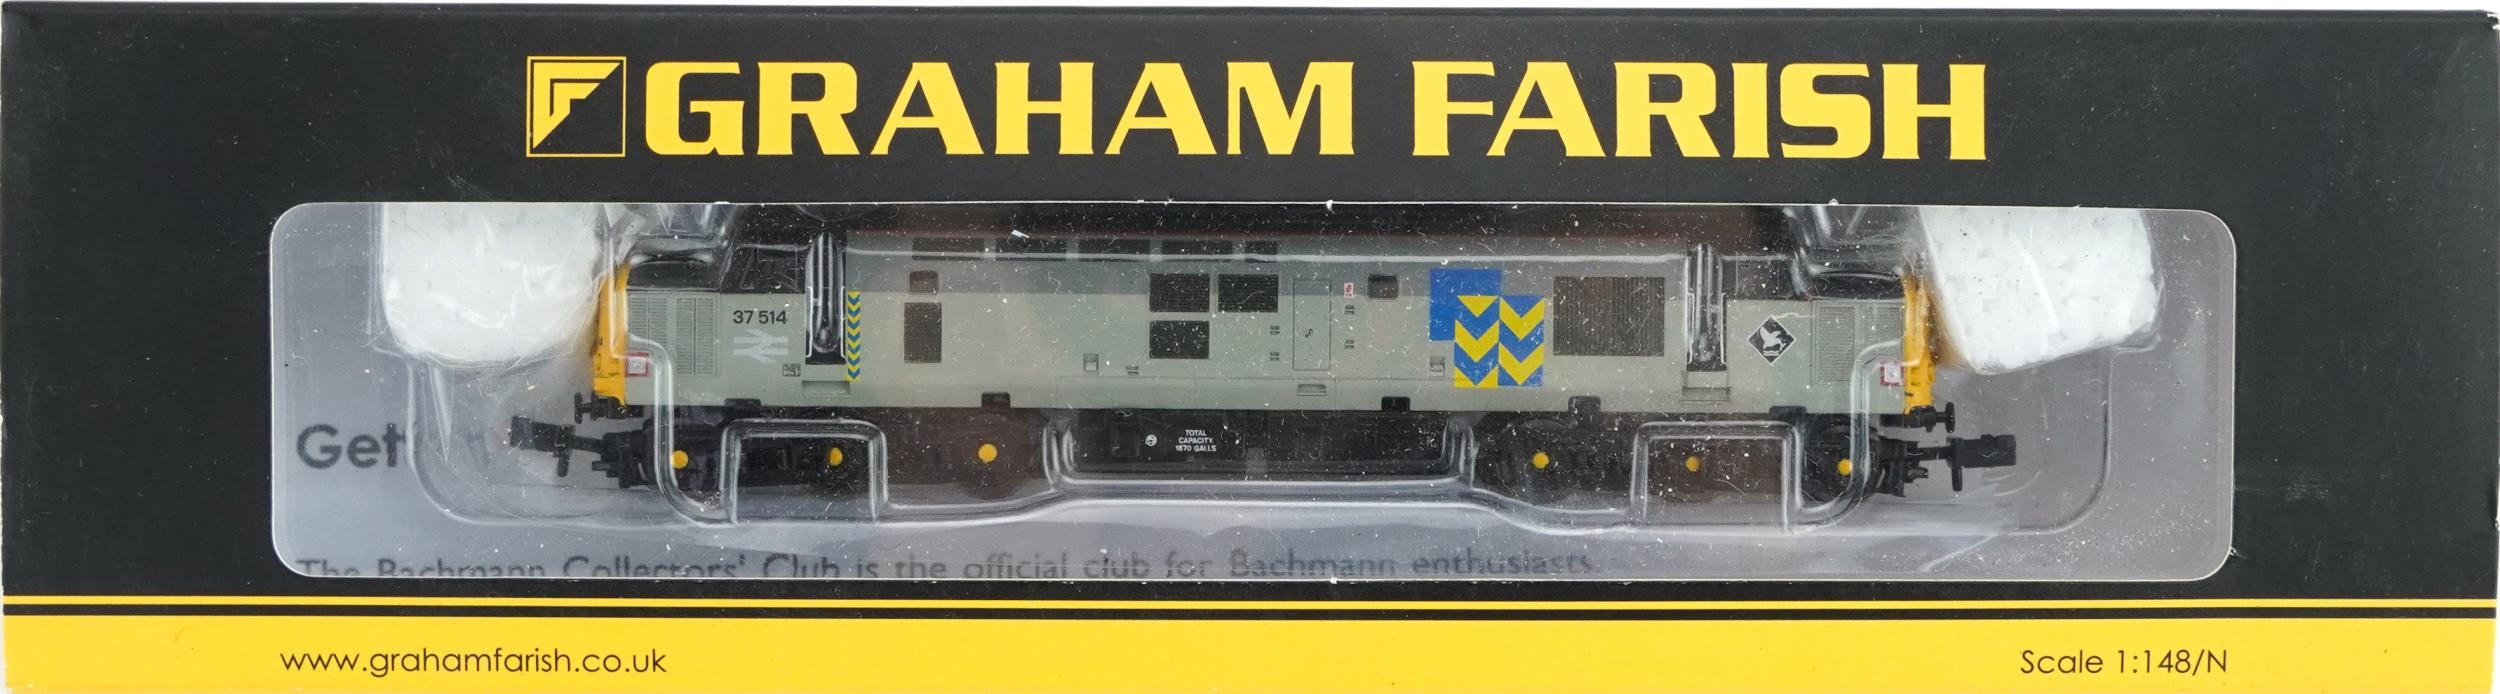 Two Graham Farish N gauge model railway locomotives with cases, numbers 371-166 and 371-167 - Image 2 of 3